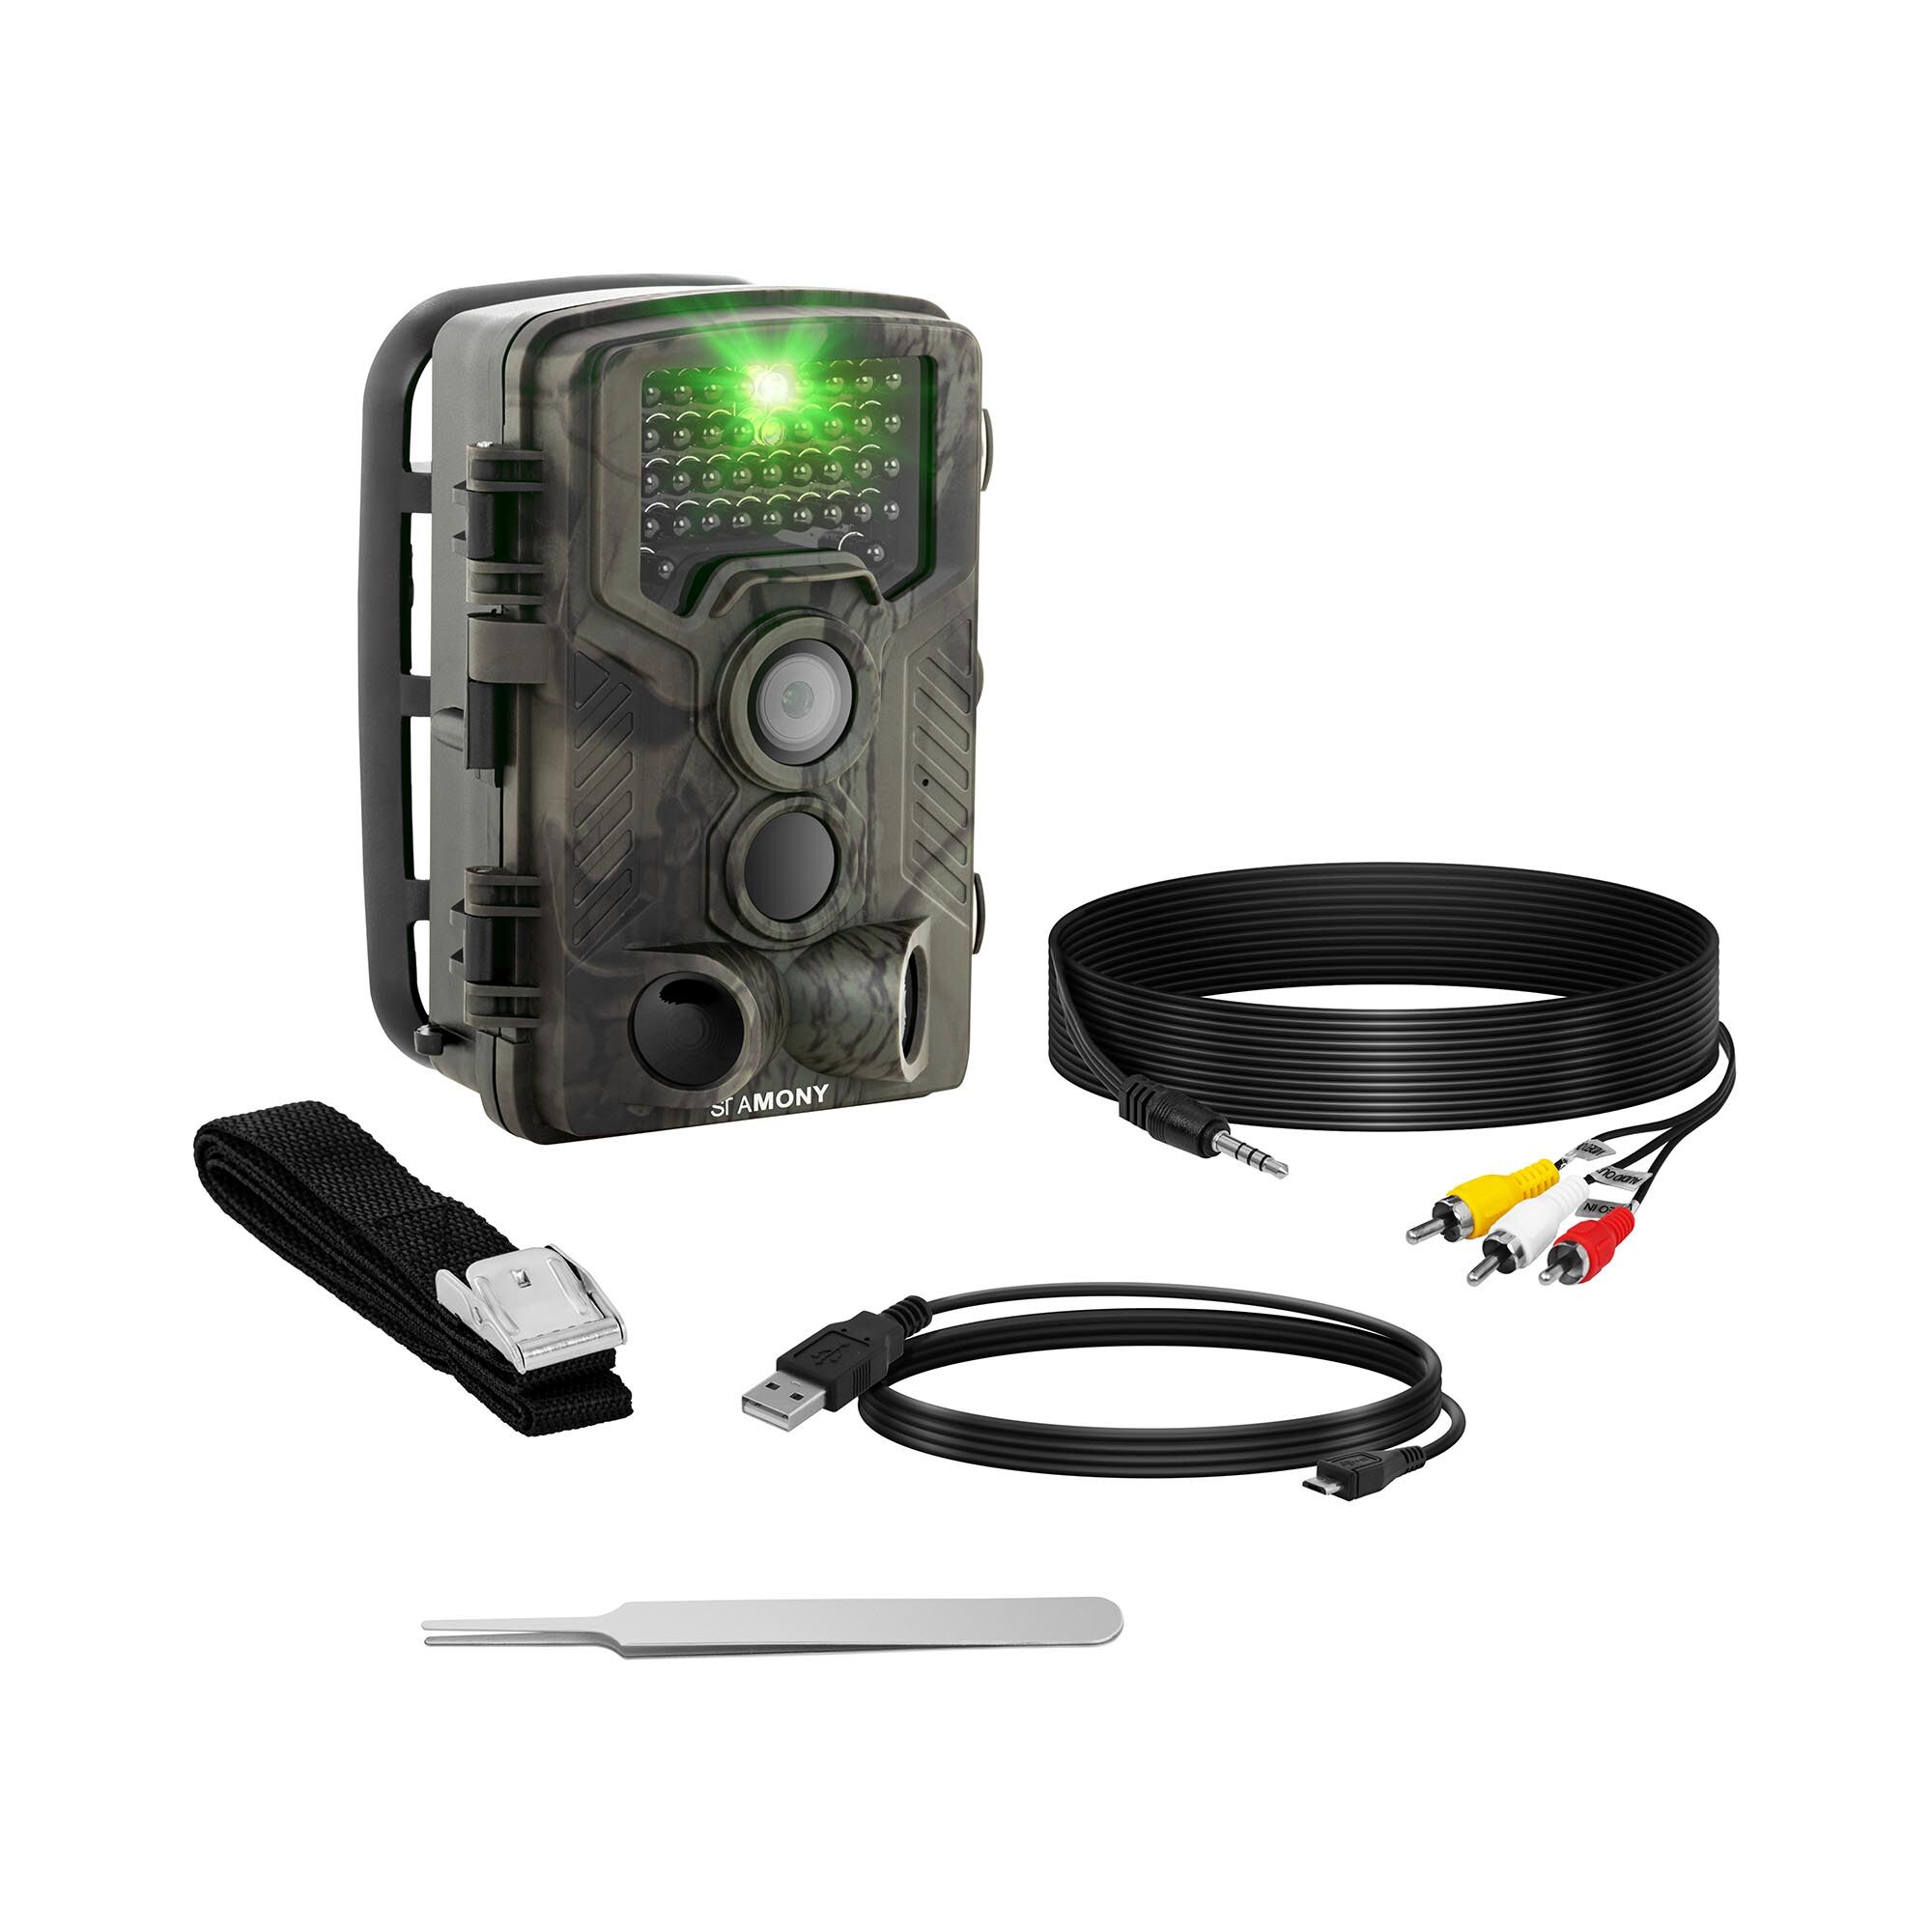 Stamony Caméra de chasse - 8 Mpx - HD intégrale - 42 LED infrarouge - 20 m - 0,3 s - LTE ST-5000LTE